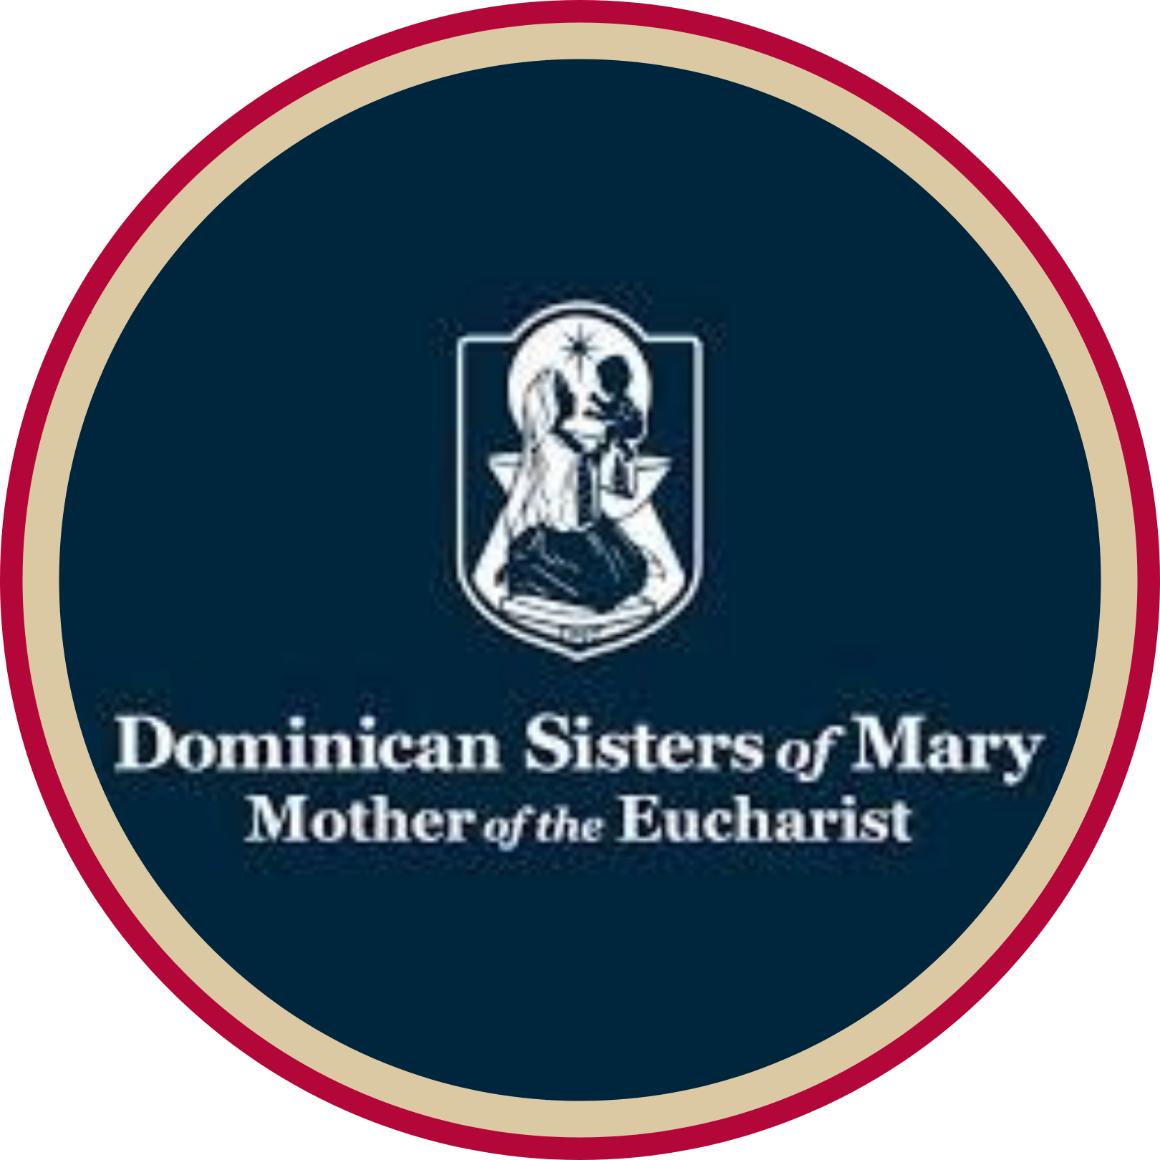 Dominican Sisters of Mary Mom of Eucharist logo